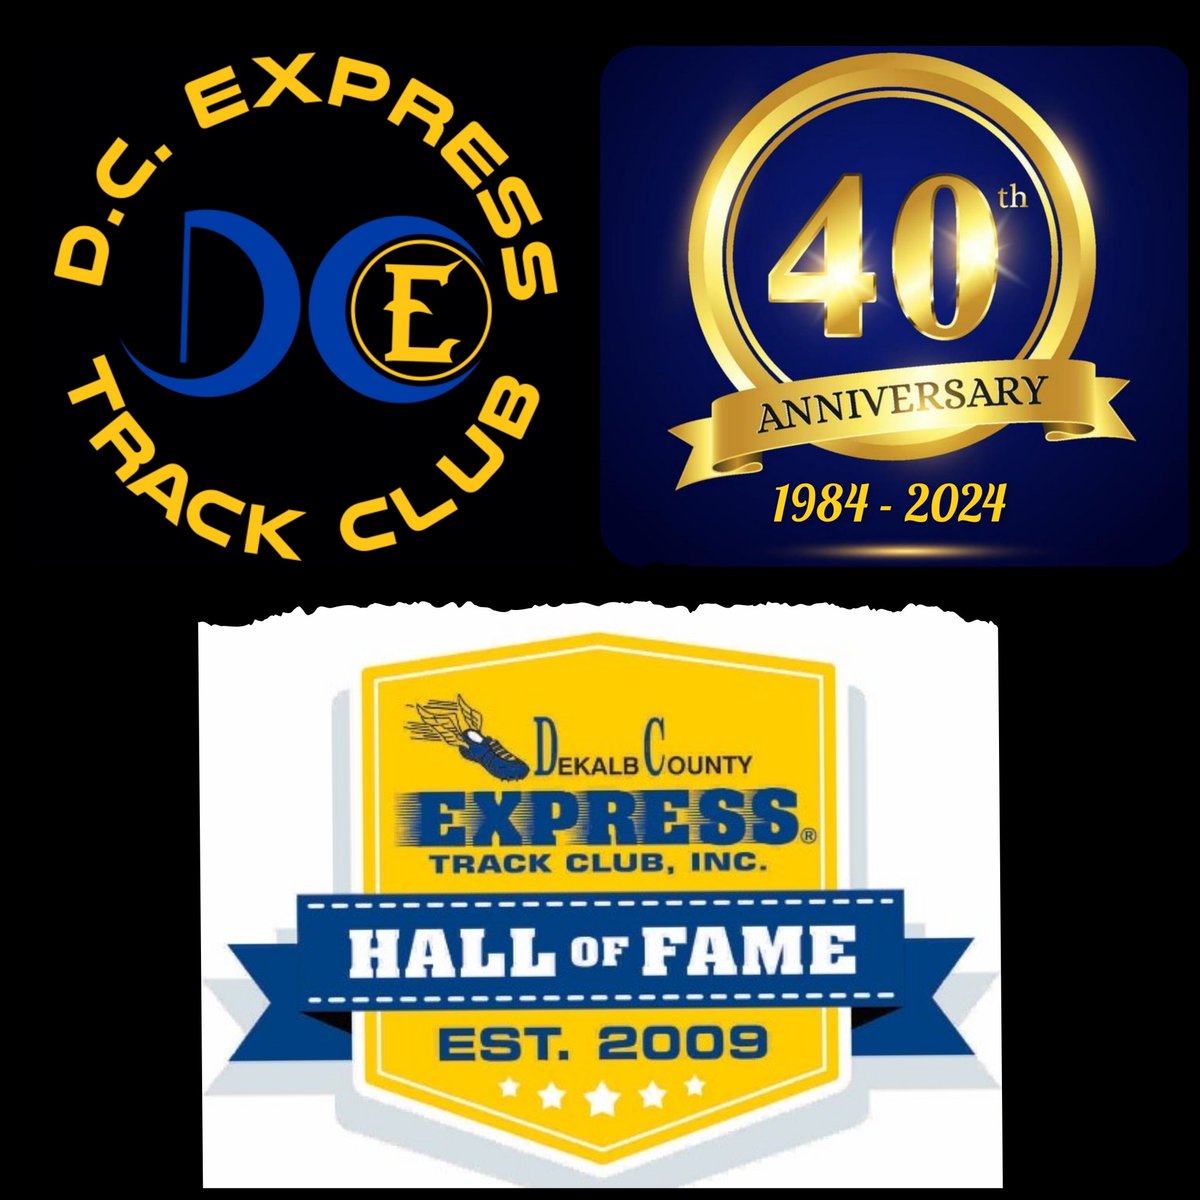 D.C. Express 40th Anniversary Gala
#dcexpress40
#dcexpresstc #protectthelegacy